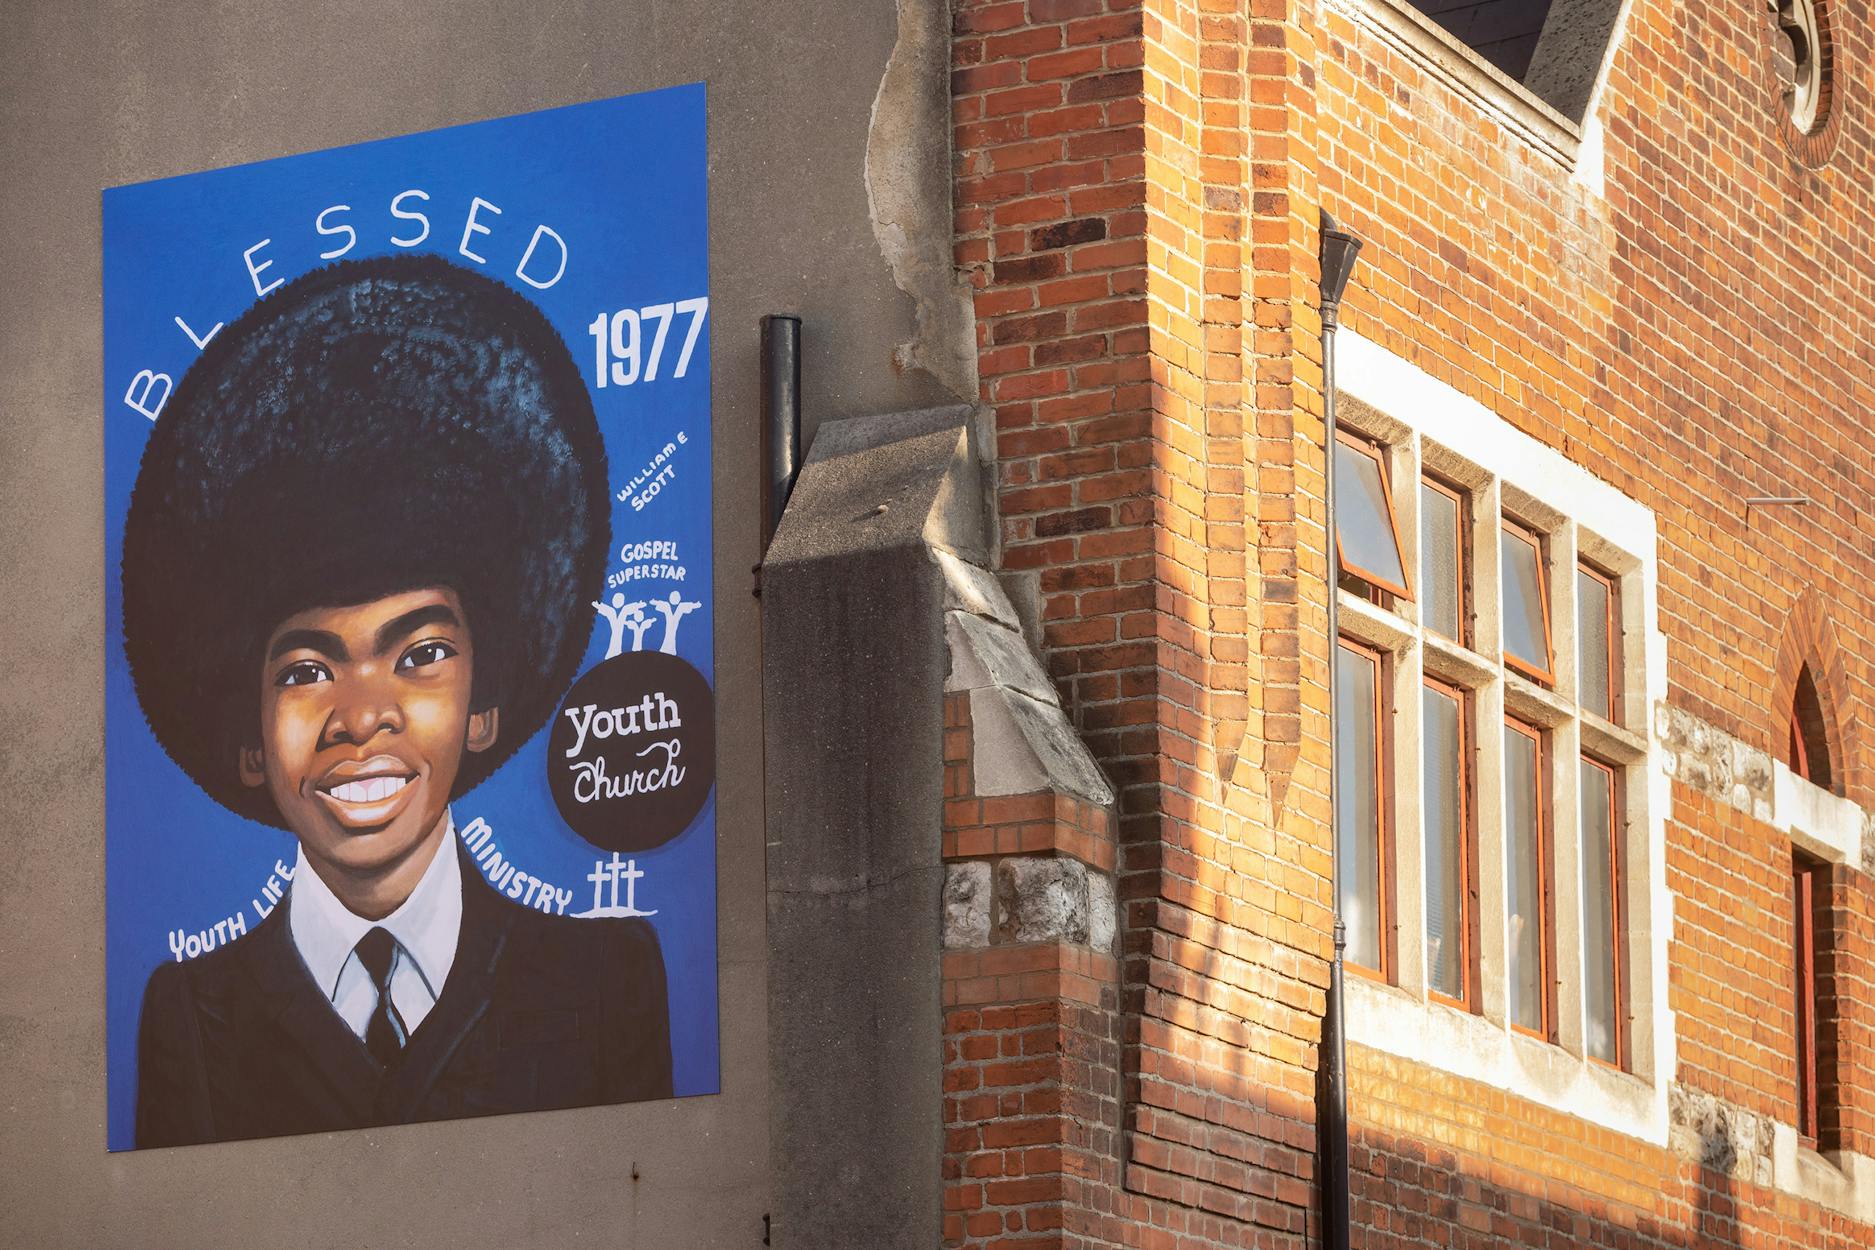 a Photograph of the exterior corner of a brick building. On one wall there is a painting of a Black young person wearing a black suit with a white shirt and black tie. They are painted against a blue backdrop.